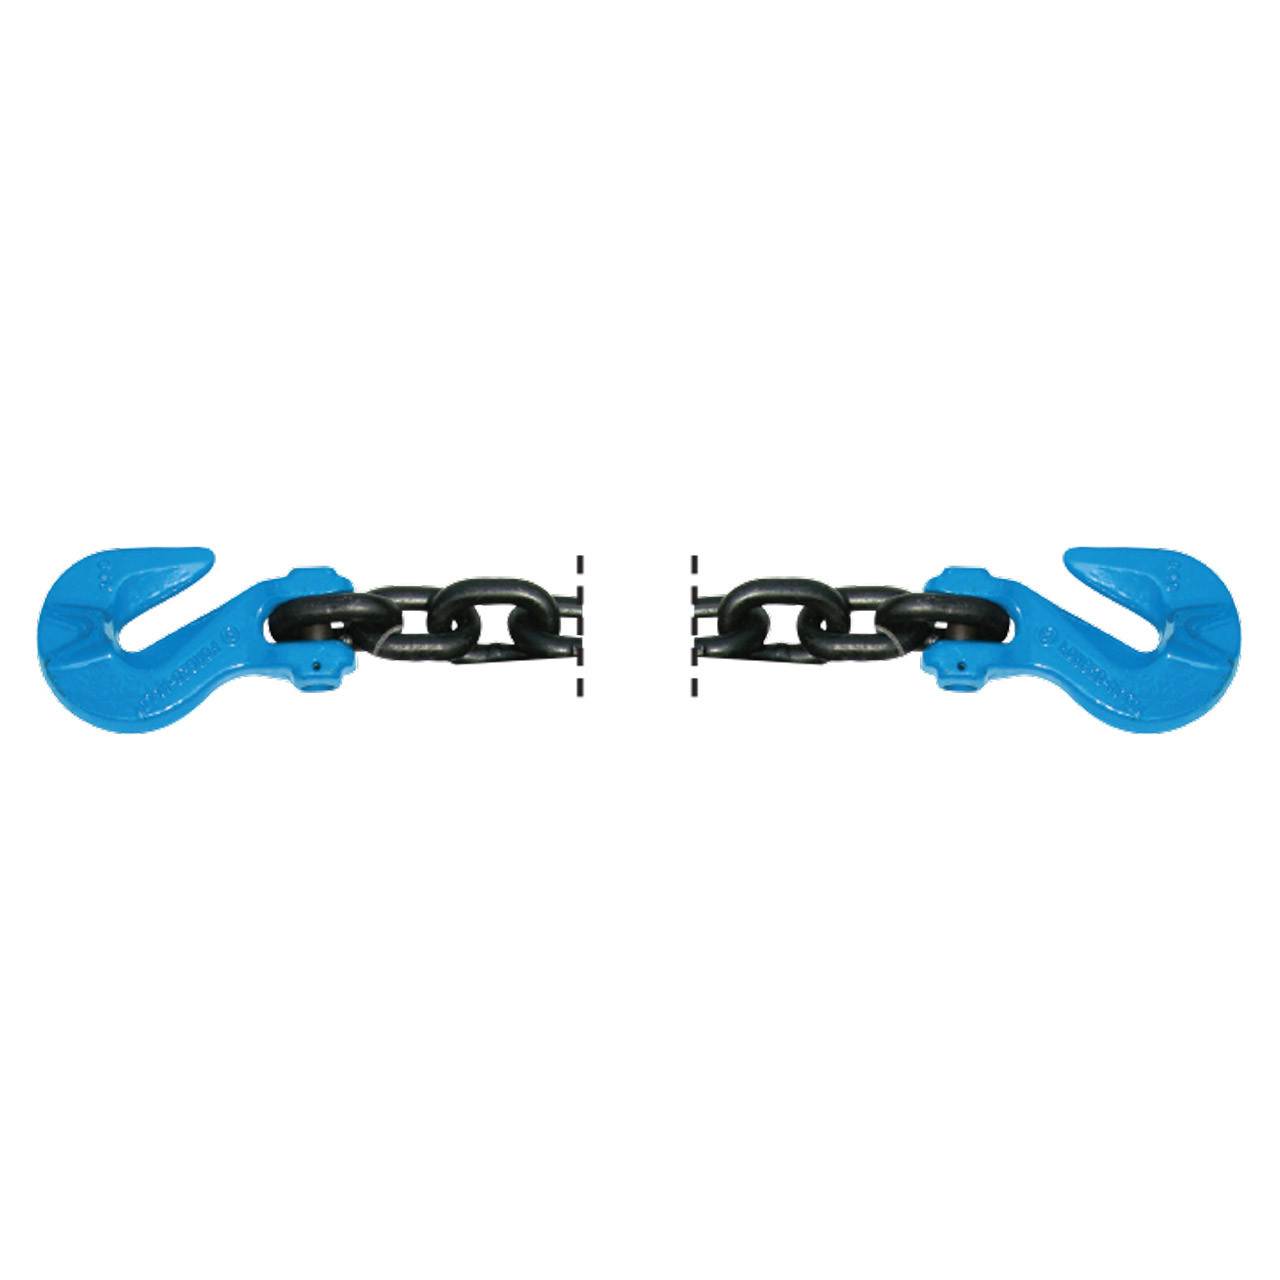 B/A Products Co. 3/8 Grade 100 Cradle Grab Hook Chain